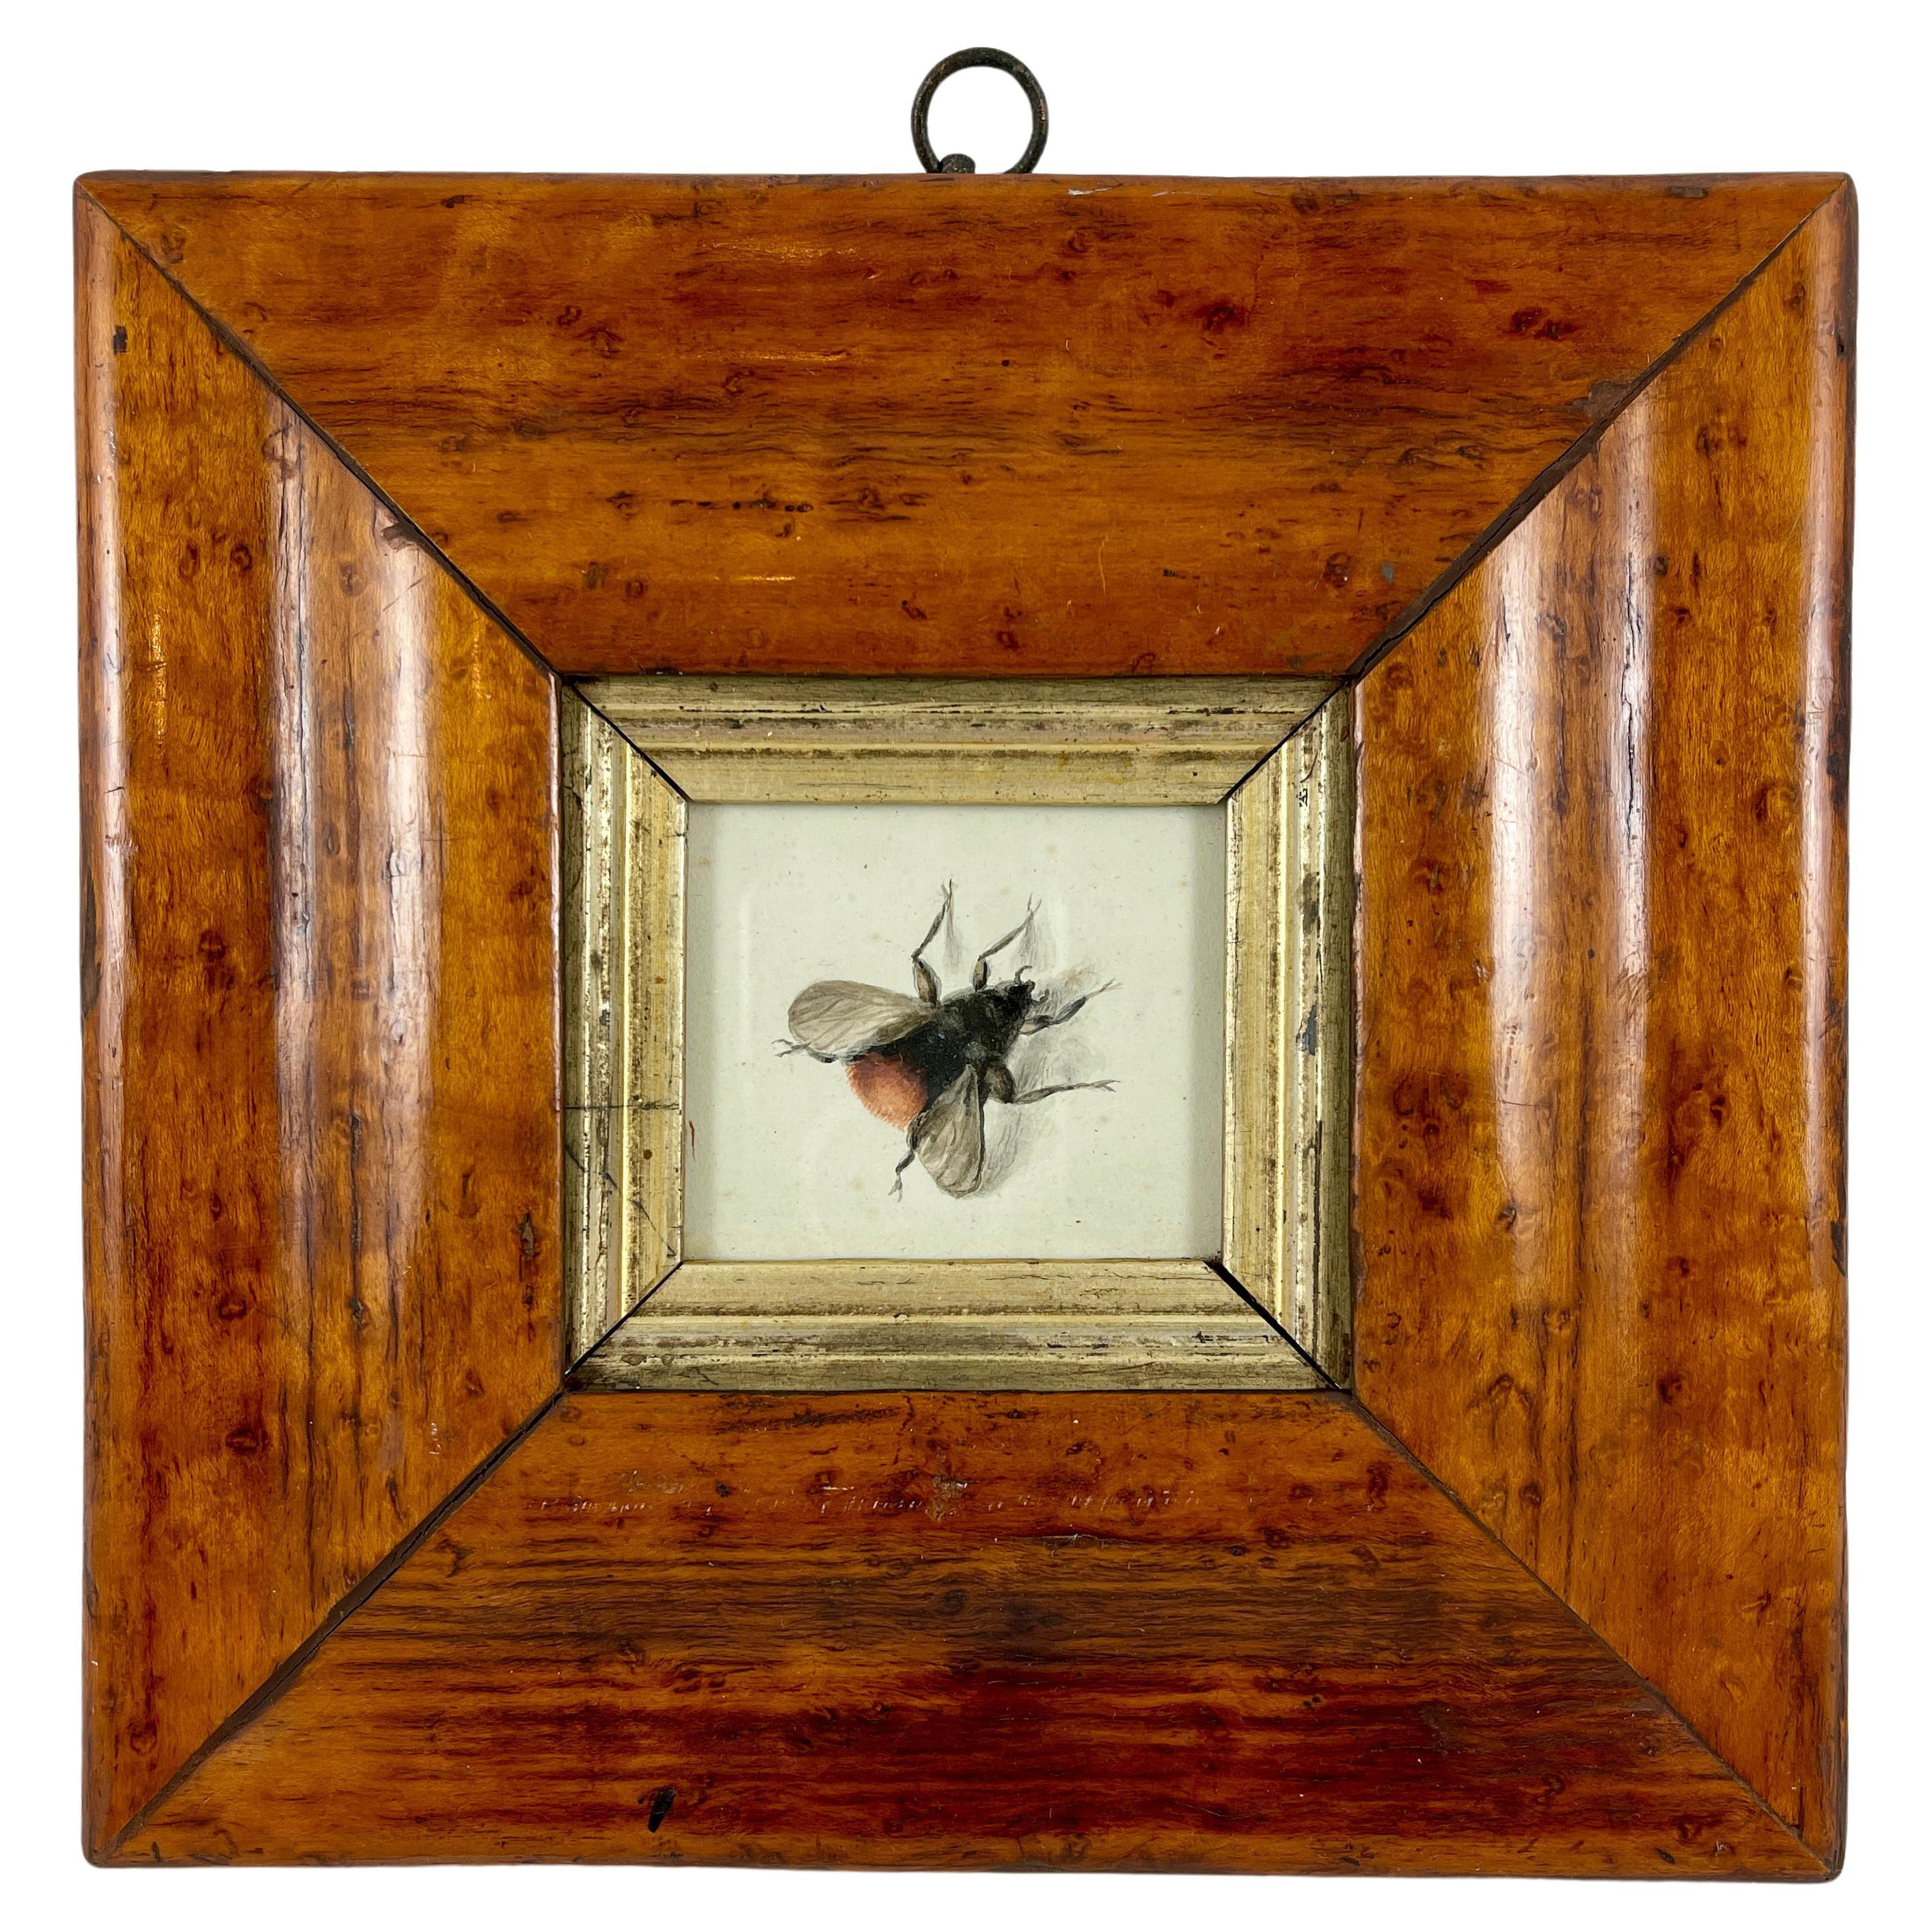 English Regency Period Original Watercolor Fruitwood Frame, a Bumble Bee Study 